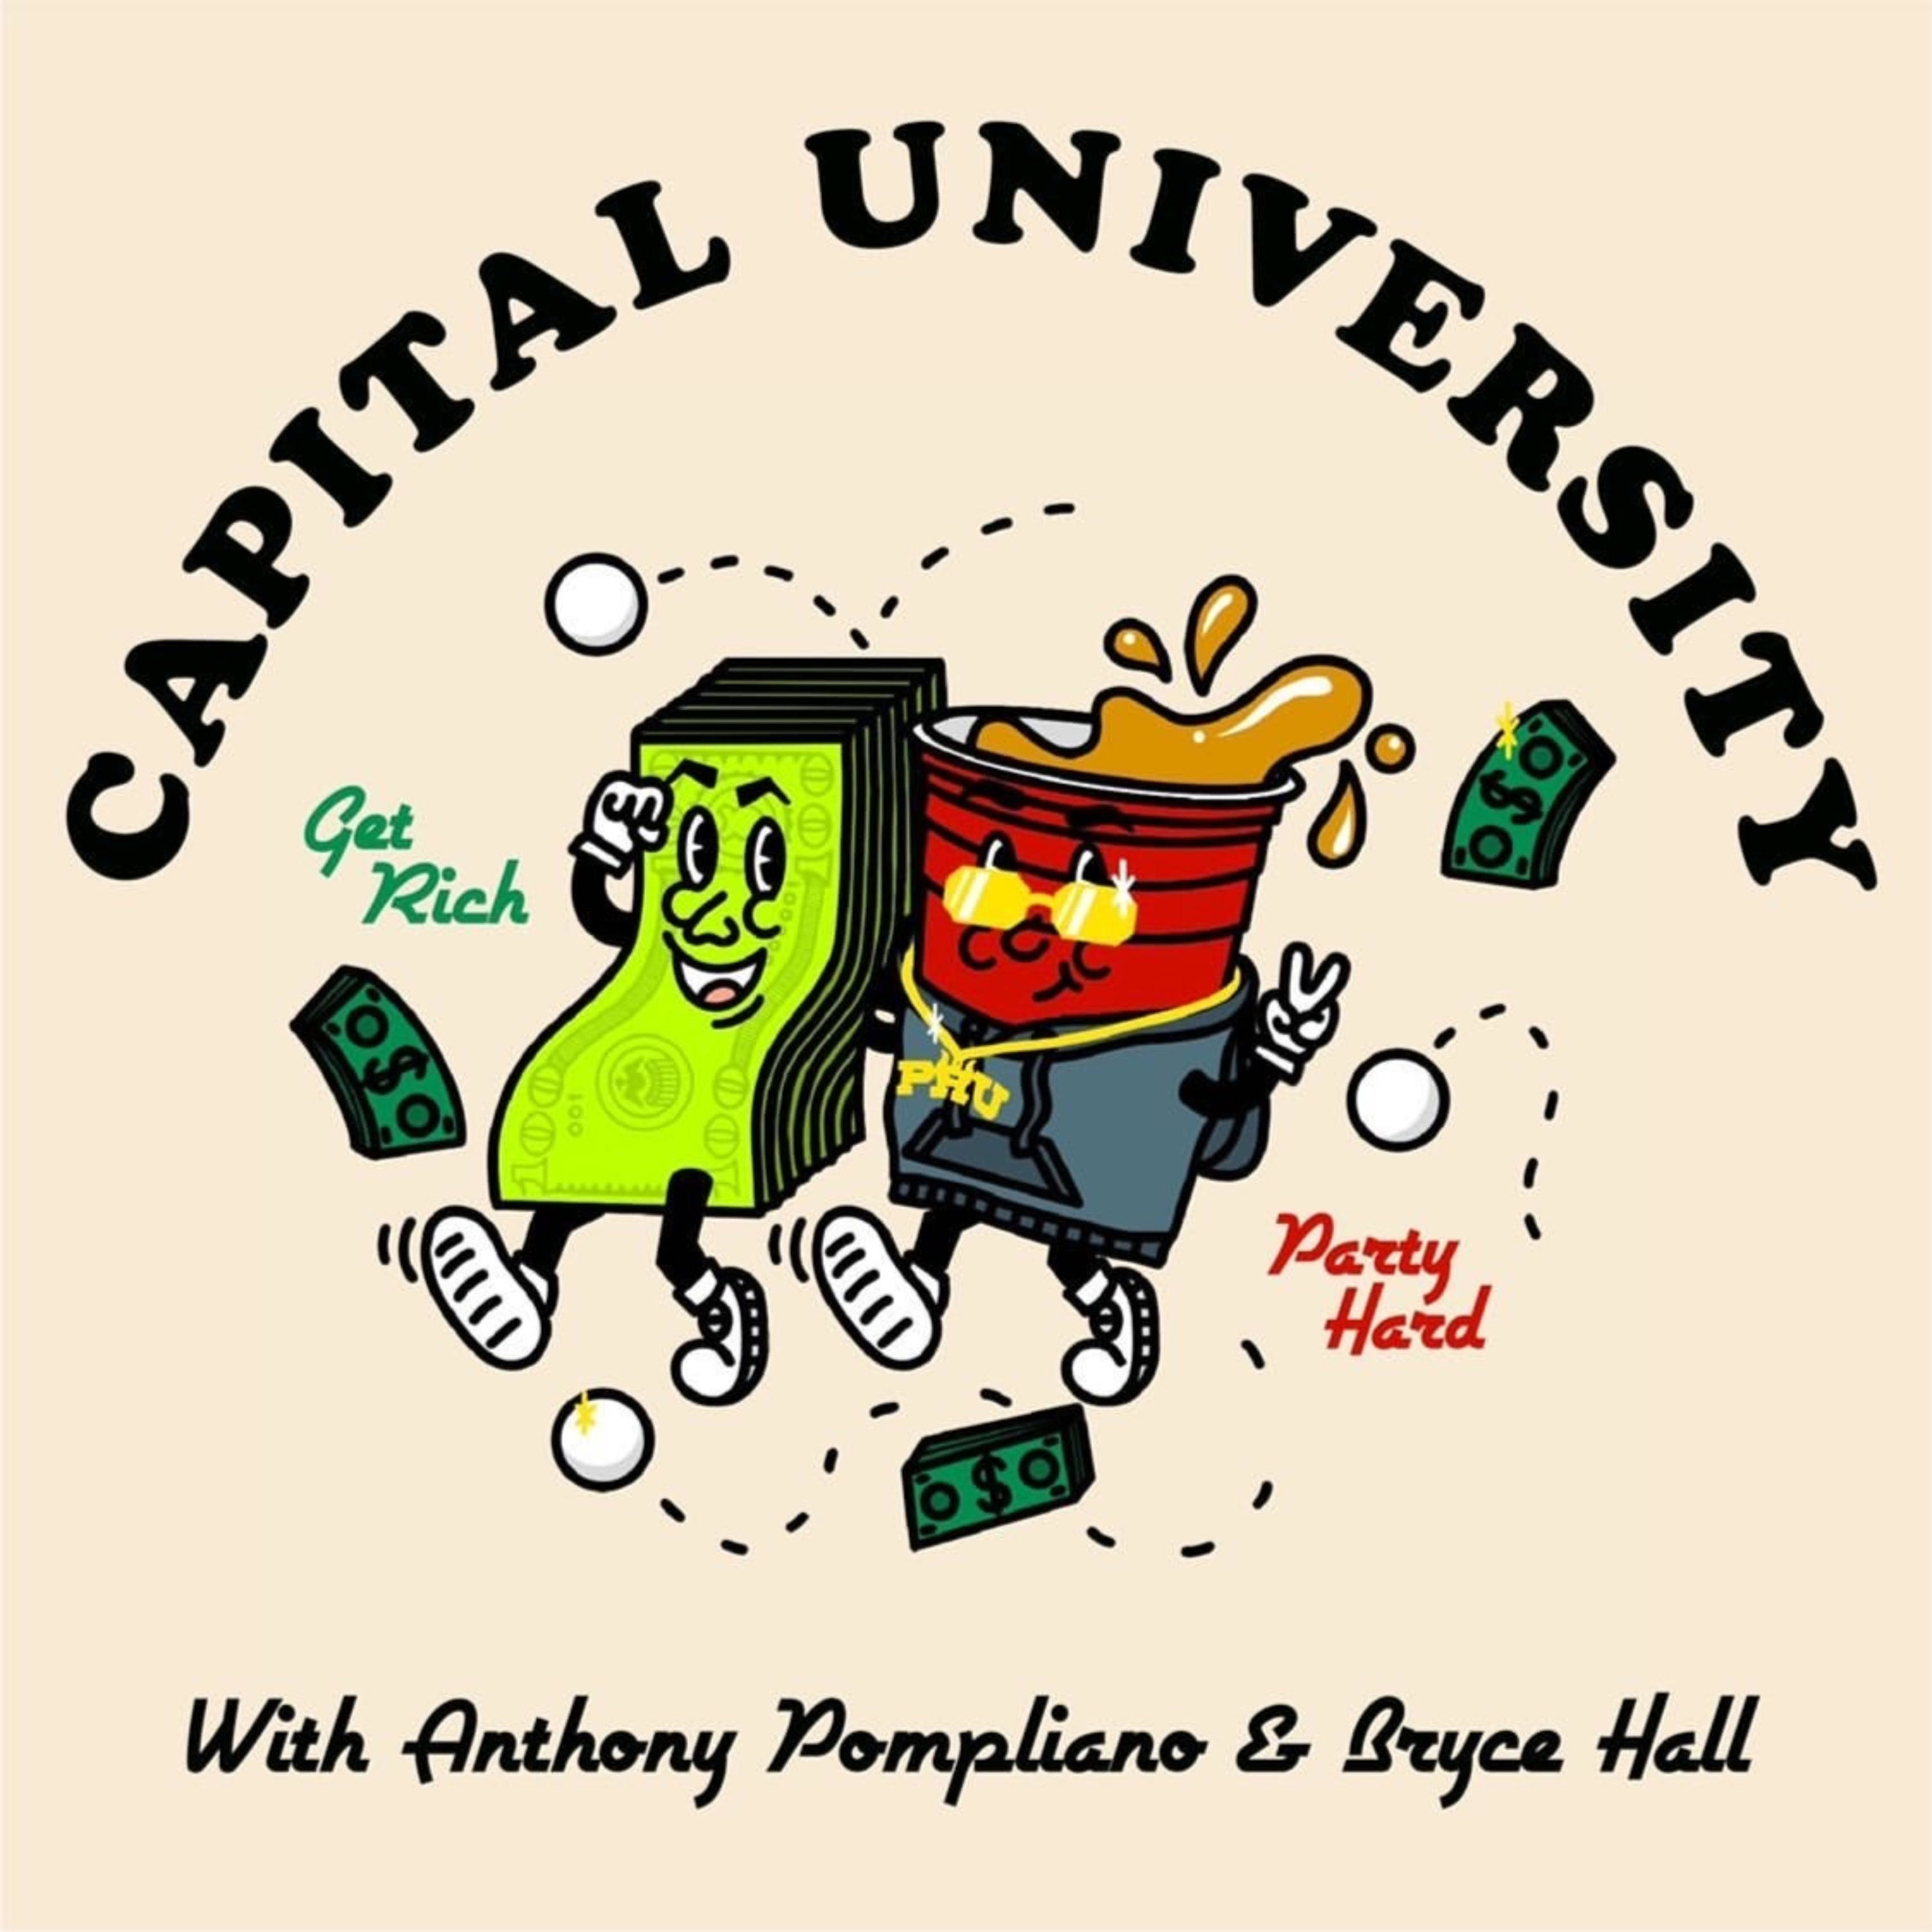 #1: Welcome to Capital University with Bryce Hall & Anthony Pompliano